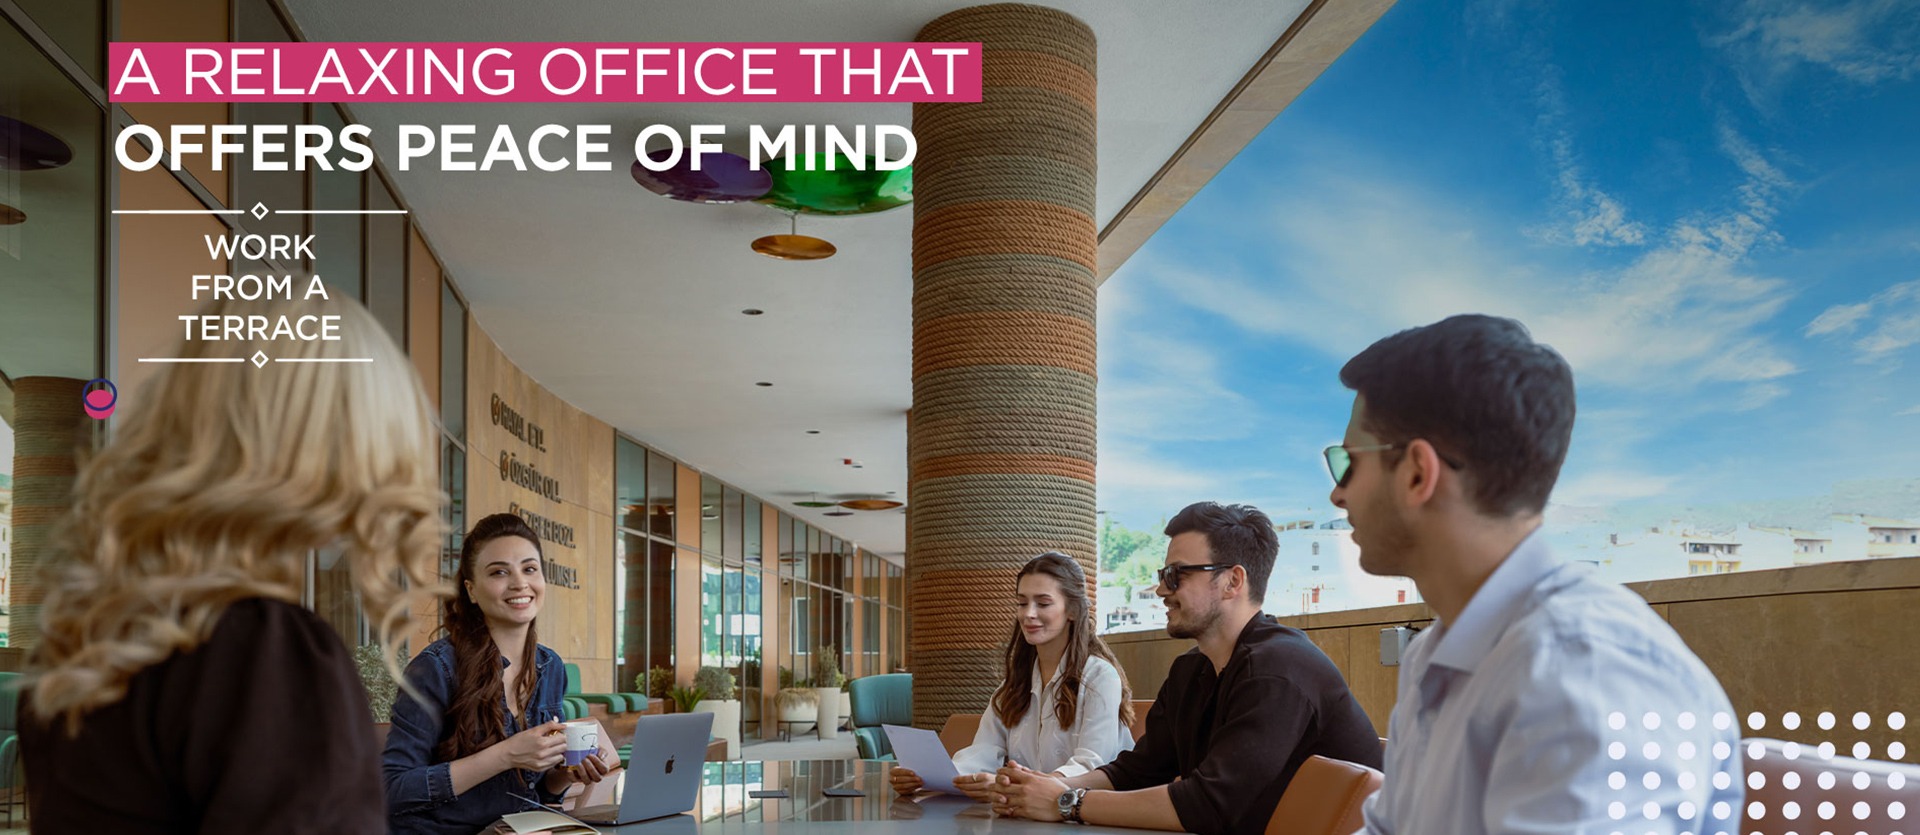 A relaxing office that offers peace of mind.